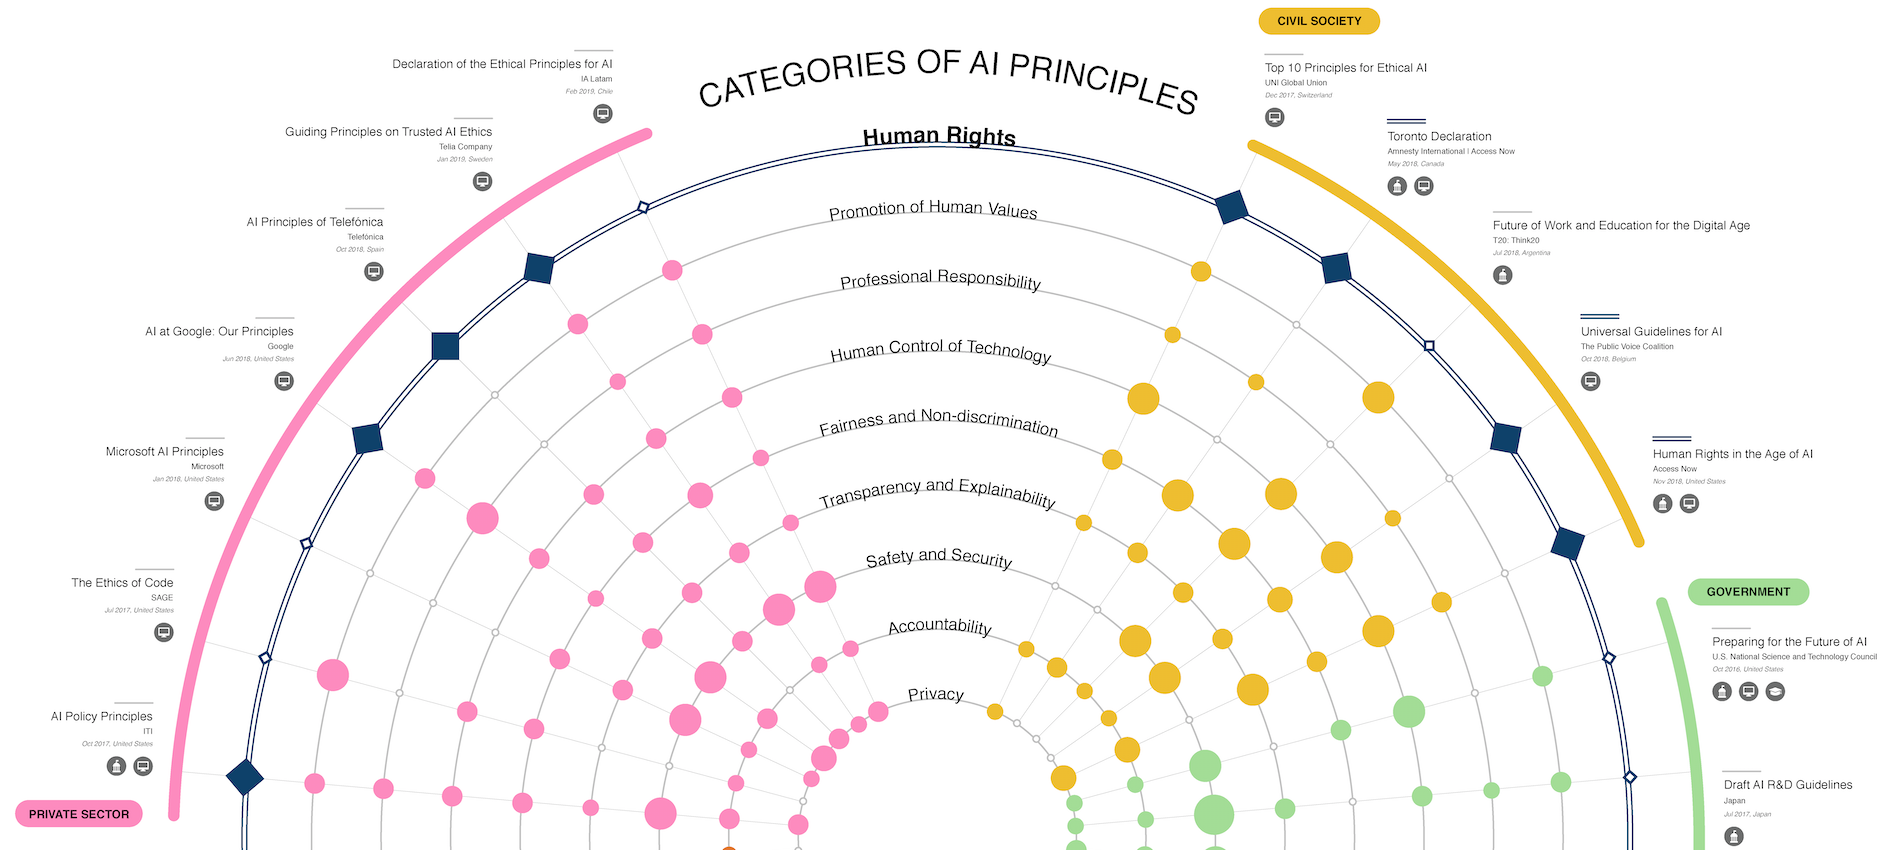 A Map of Ethical and Right-Based Approaches. Source: https://ai-hr.cyber.harvard.edu/primp-viz.html